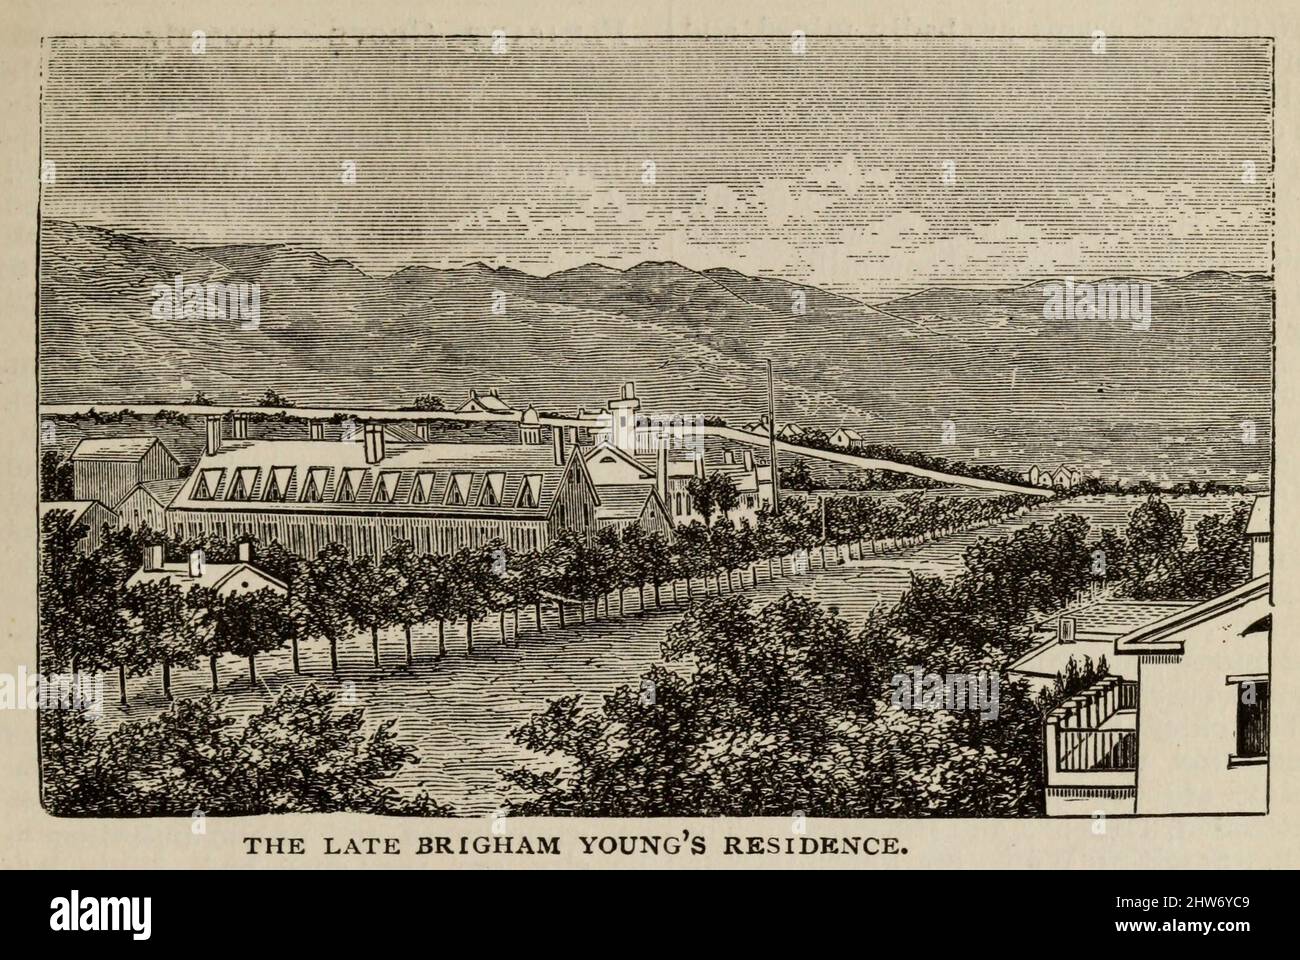 THE LATE BRIGHAM YOUNG'S RESIDENCE from the book Crofutt's new overland tourist and Pacific coast guide : containing description cities, towns, villages, stations, government fort and camps, mountains, lakes, rivers, sulphur, soda and hot springs, scenery, watering places, and summer resorts : where to look for and hunt the buffalo, antelope, deer and other game; trout fishing, through Nebraska, Wyoming, Colorado, Utah, Montana, Idaho, Nevada, California and Arizona by George A Crofutt, Published in Chicago, Ill., by The Overland Pub. Co in 1879 Stock Photo